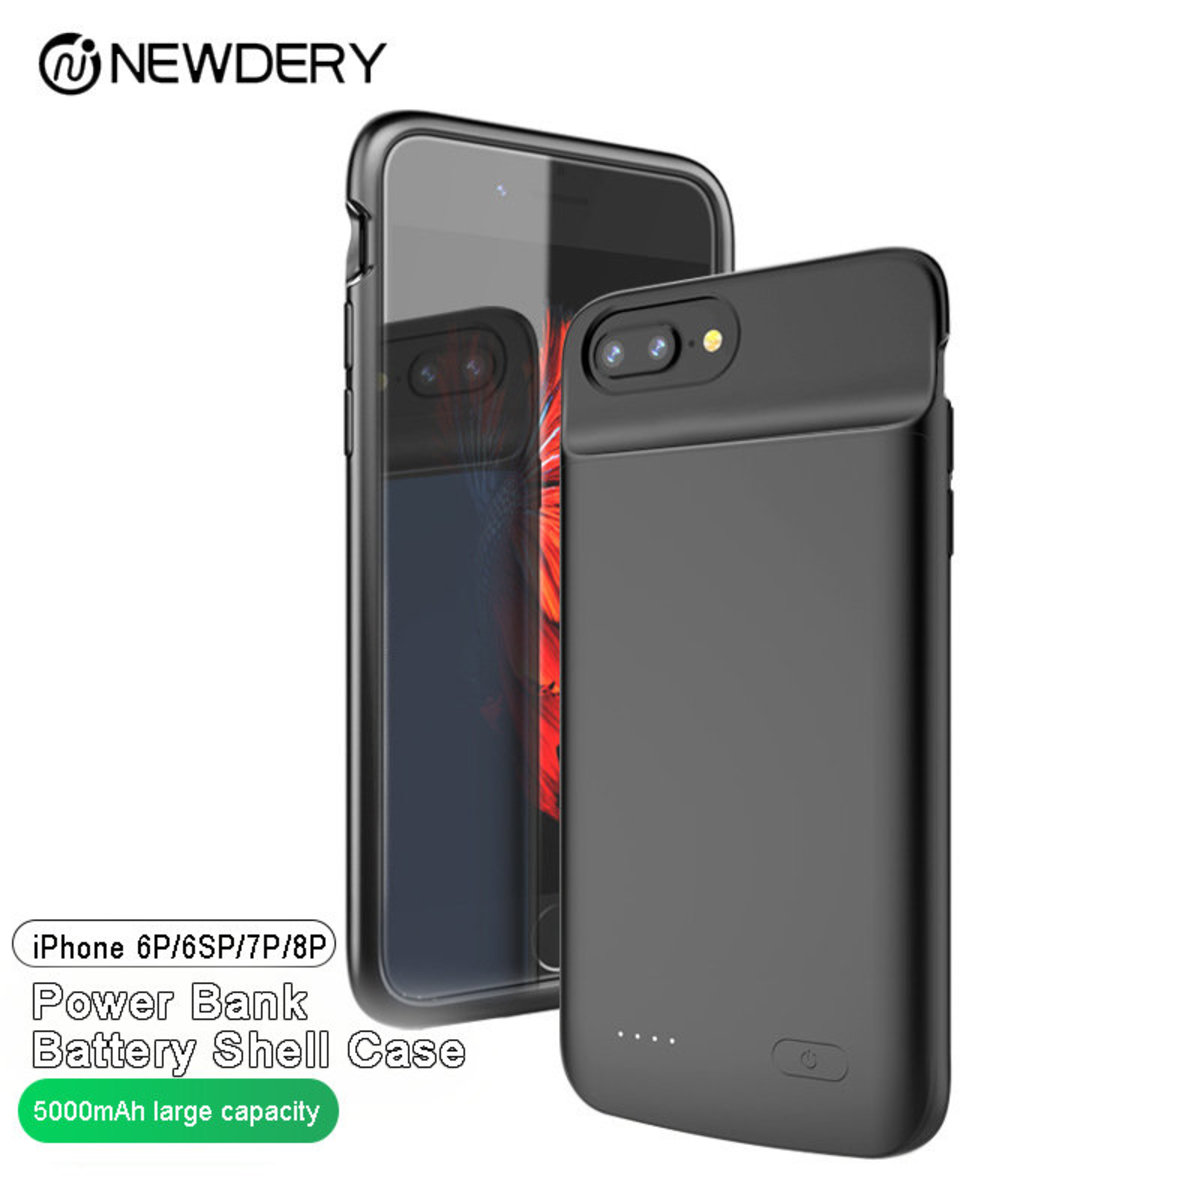 Power Bank Battery Shell Case 5000mAh For iPhone 6p 6sp 7p 8p (Hong Kong Warranty Period 90 days)(Black Color)(Parallel Goods)